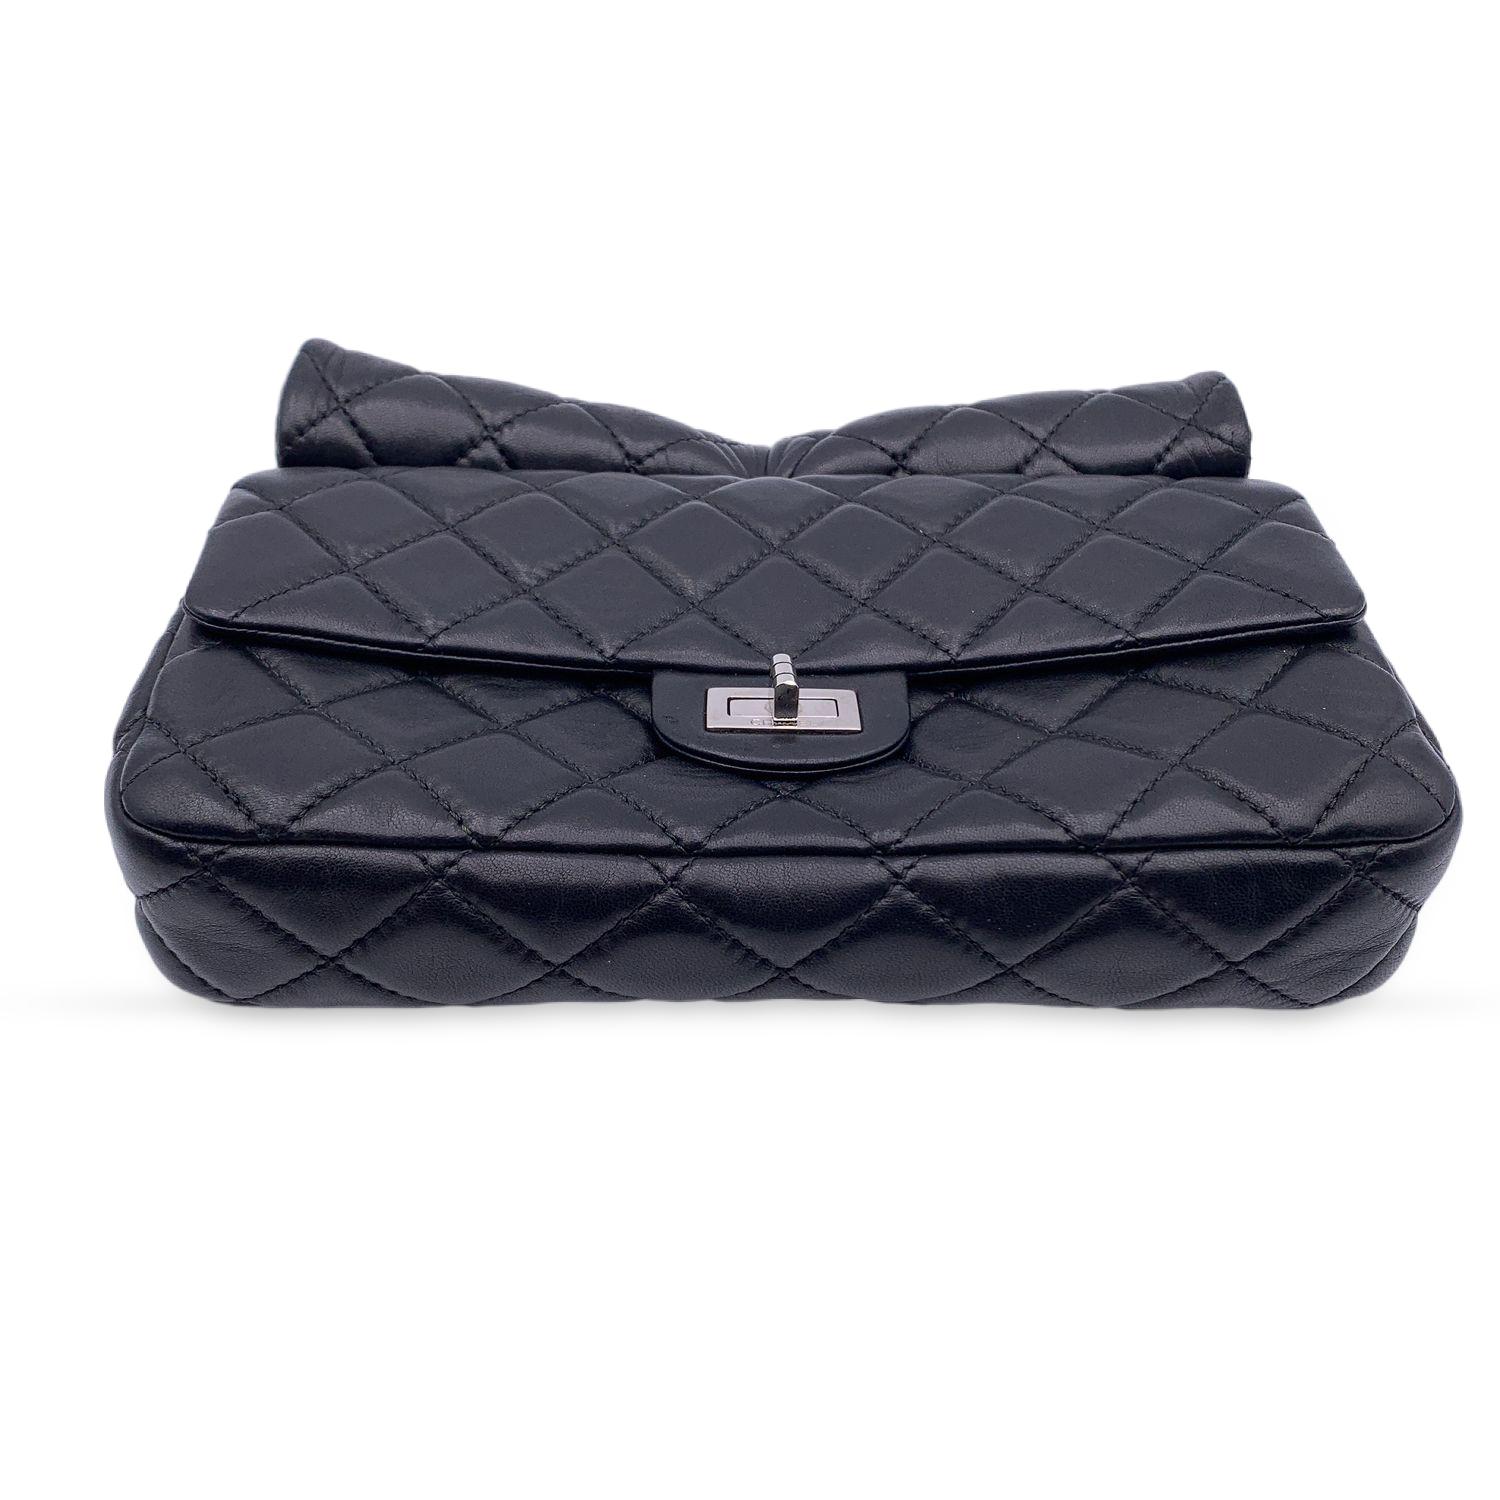 Women's Chanel Black Quilted Leather Reissue Roll 2.55 Clutch Bag Handbag For Sale